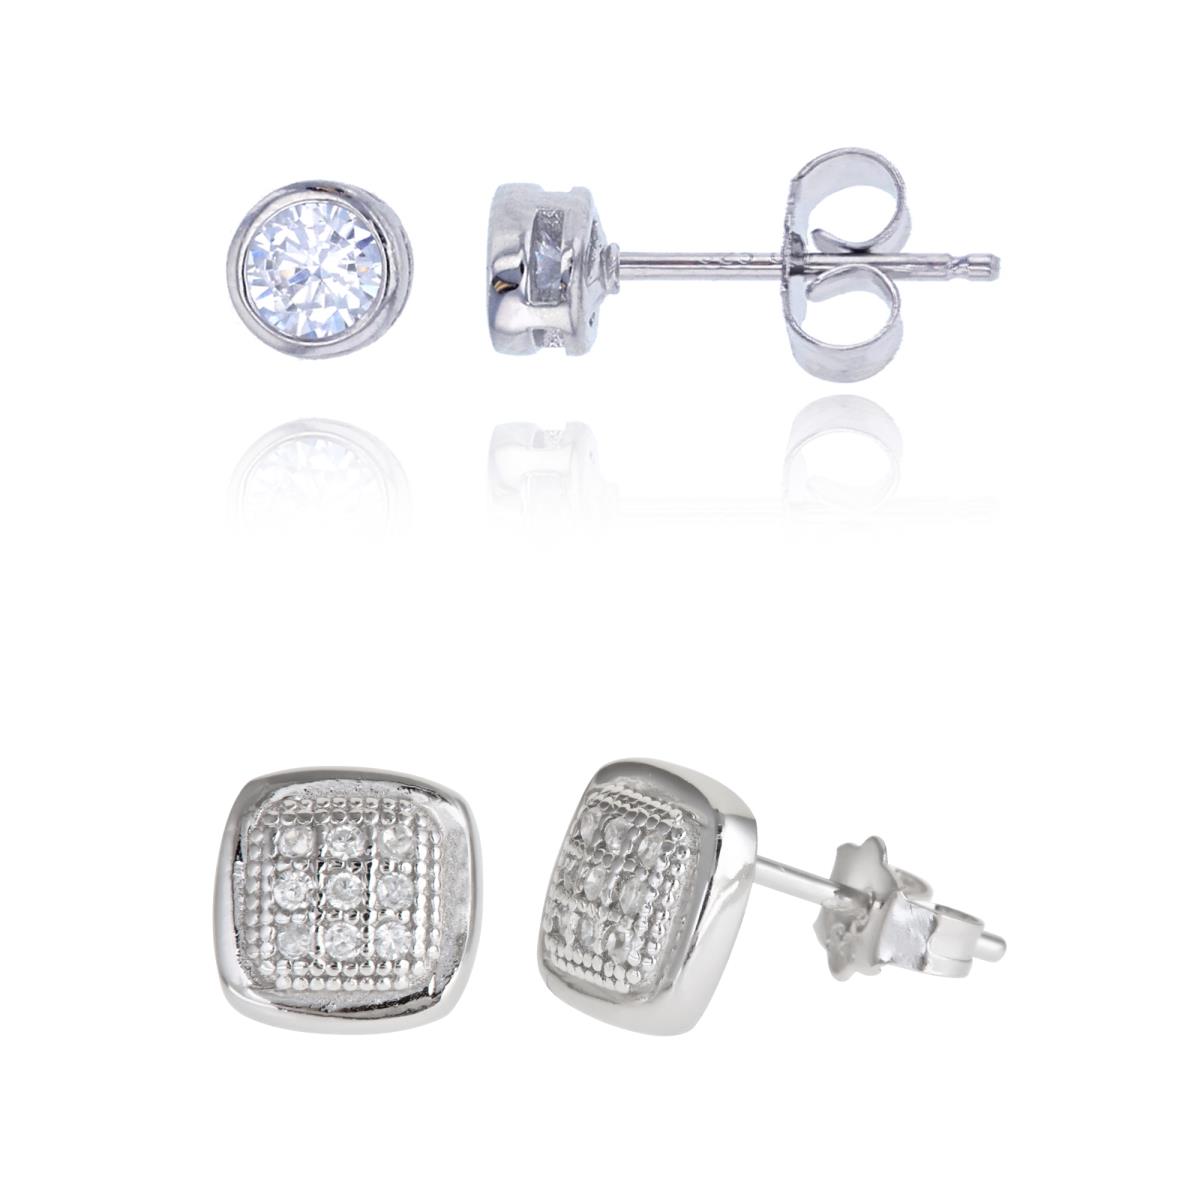 Sterling Silver Rhodium 3x3 Micropave Puffed Square & 4mm Round CZ Bezel Stud Earring Set